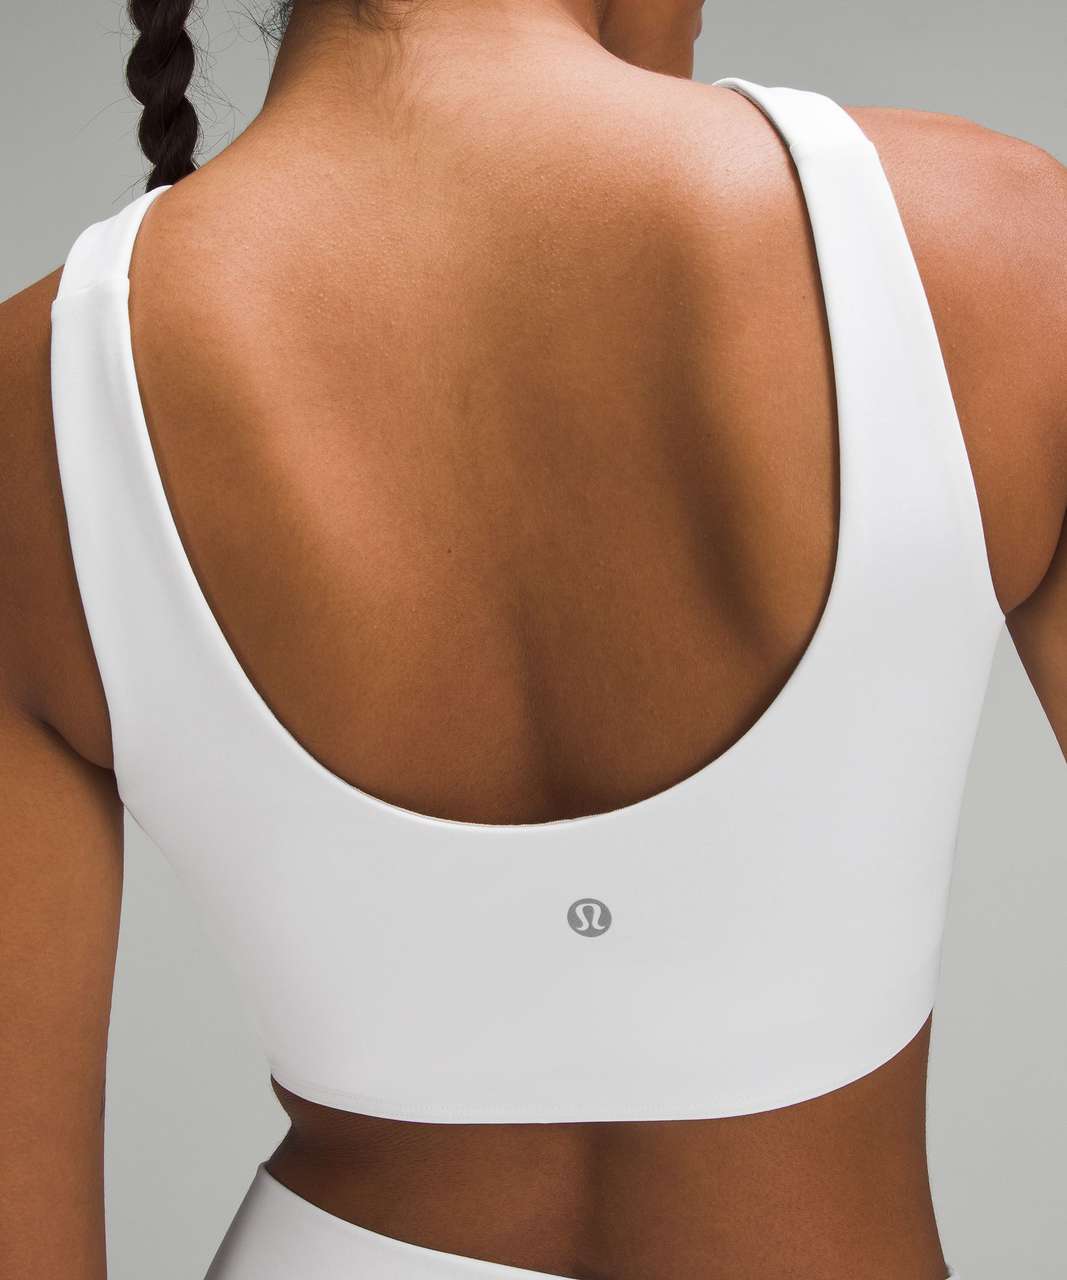 Lululemon SmoothCover Front Cut-Out Yoga Bra *Light Support, A/B Cup - White